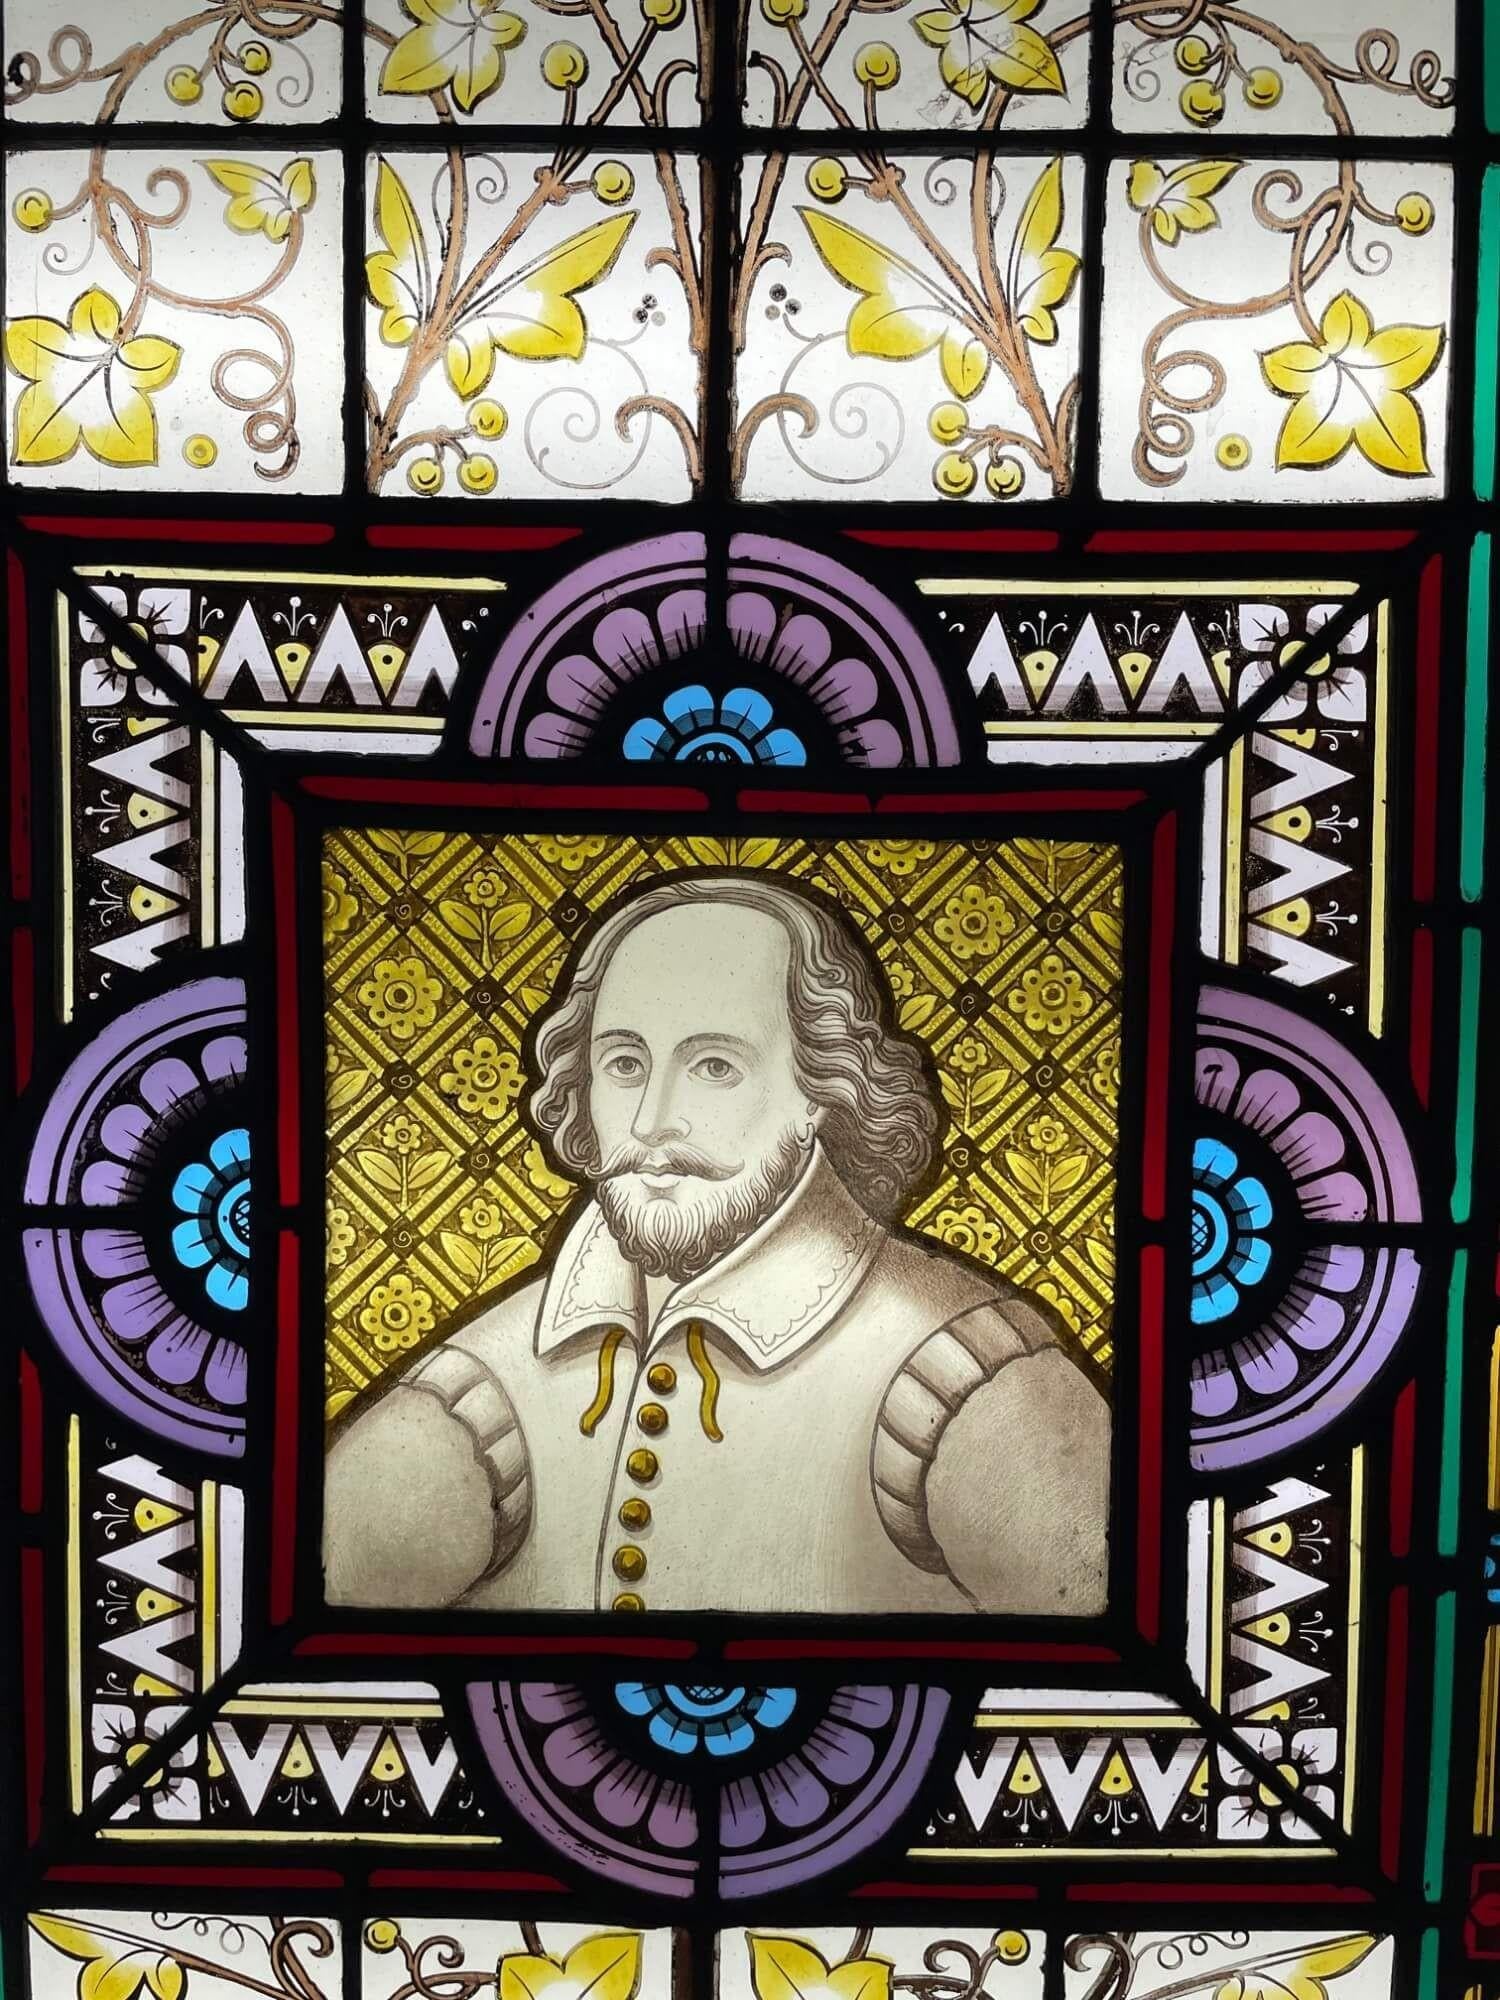 A late 19th century antique stained glass window panel depicting Shakespeare, one of 3 similar we are selling depicting notable figures of British history. At the centre is a distinguishable illustration of William Shakespeare, the famous 16th